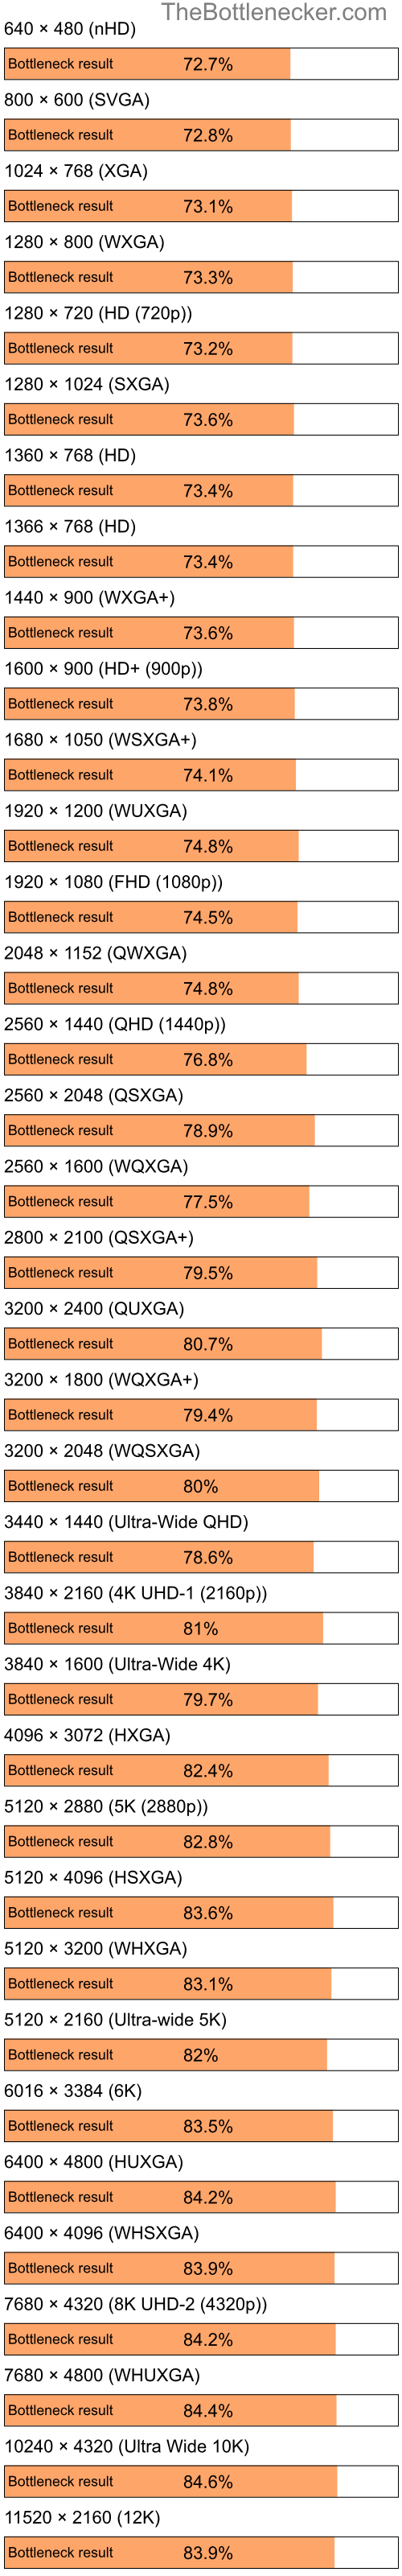 Bottleneck results by resolution for Intel Celeron and NVIDIA GeForce 7300 GS in Graphic Card Intense Tasks